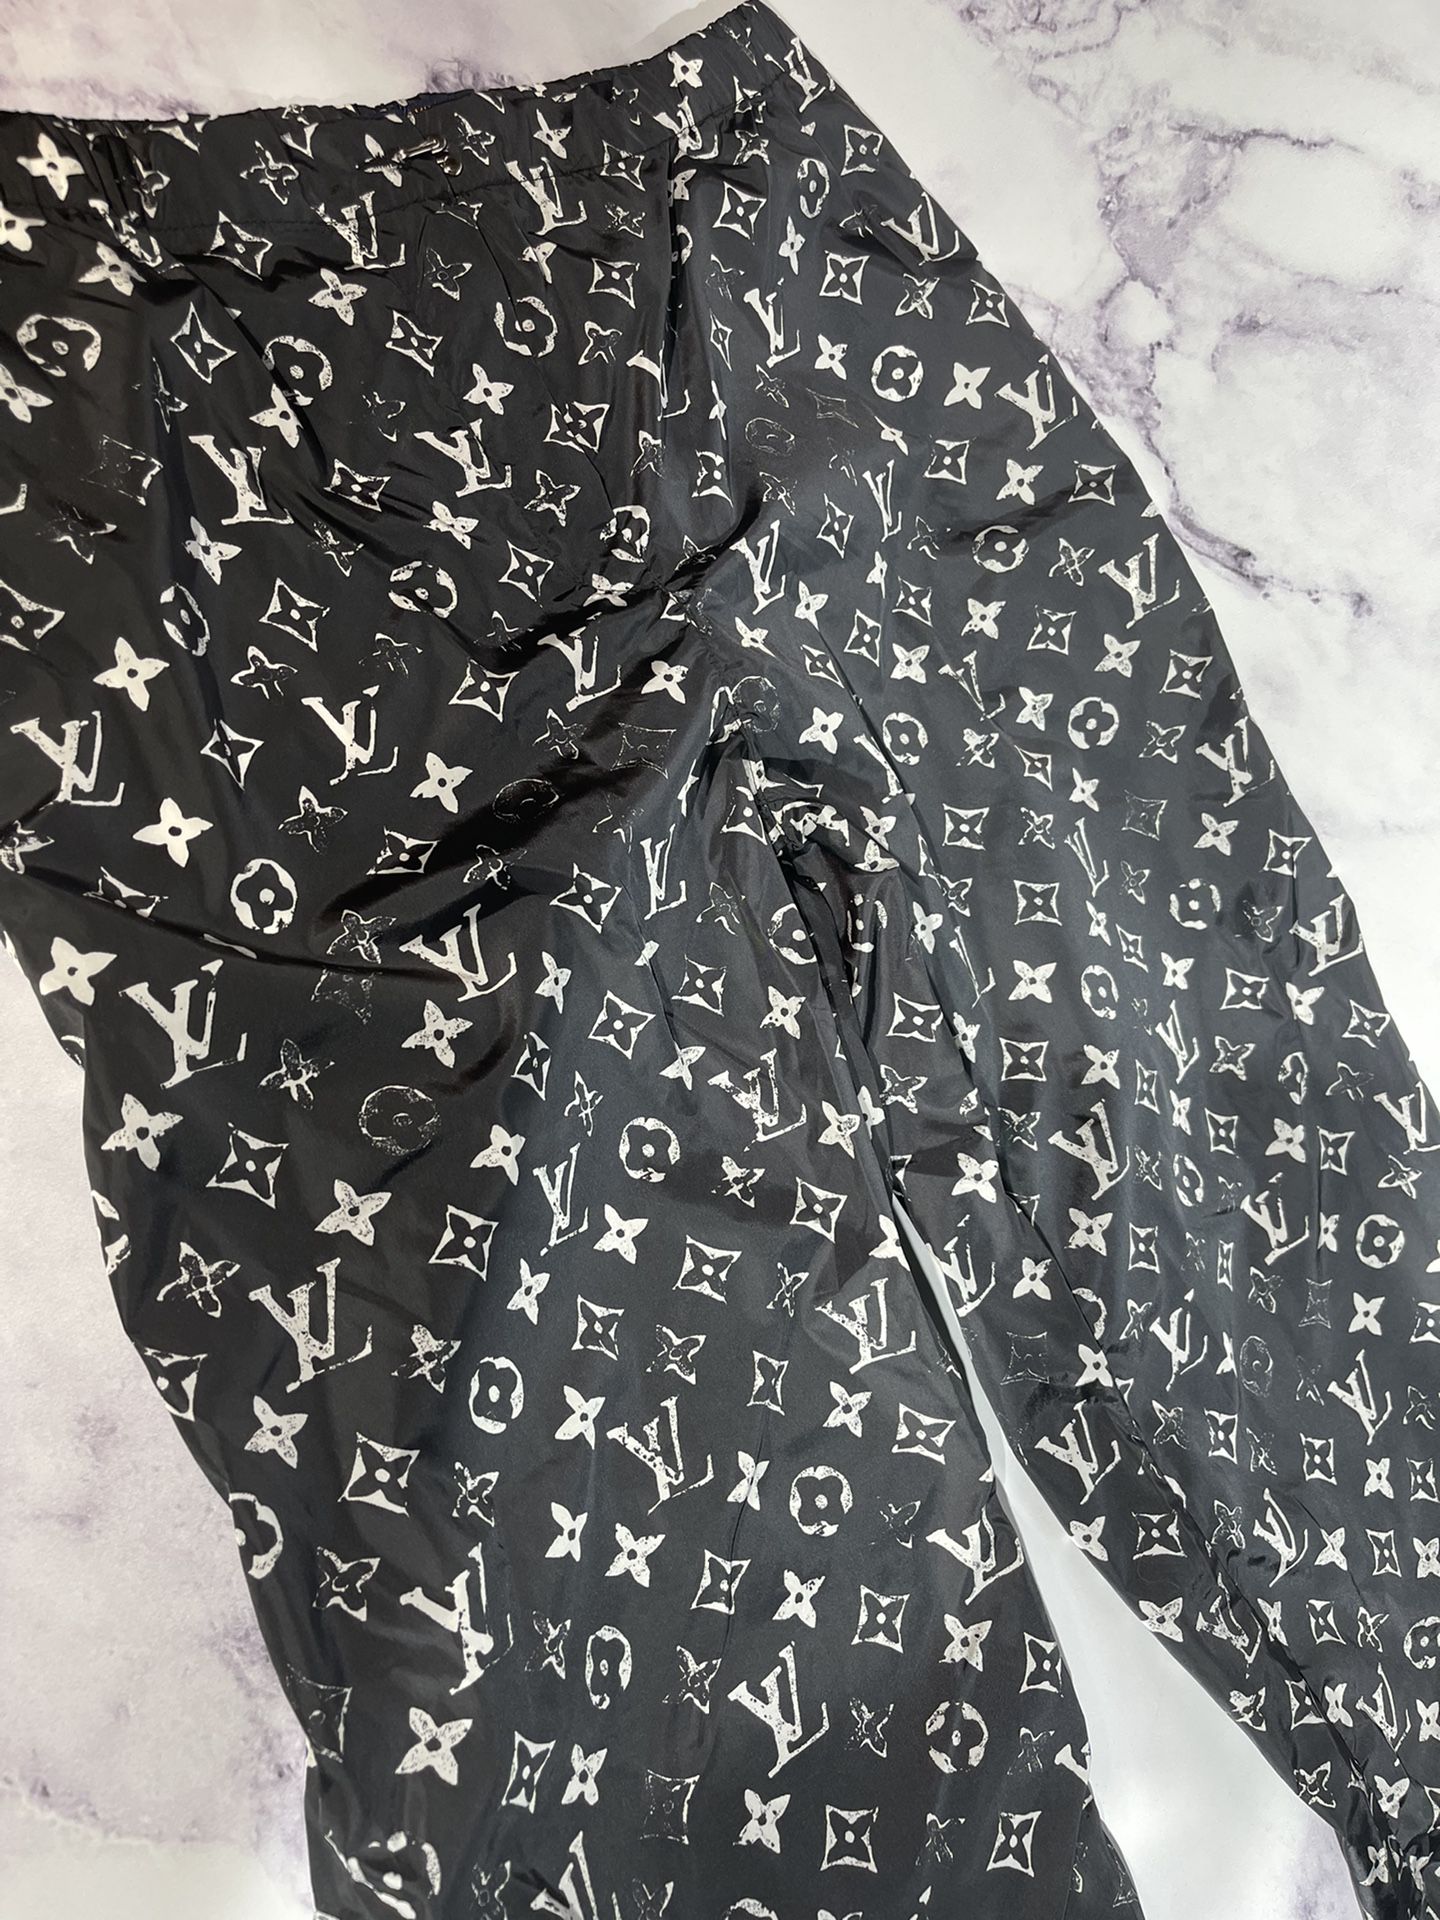 louis vuitton joggers for Sale in Brooklyn, NY - OfferUp